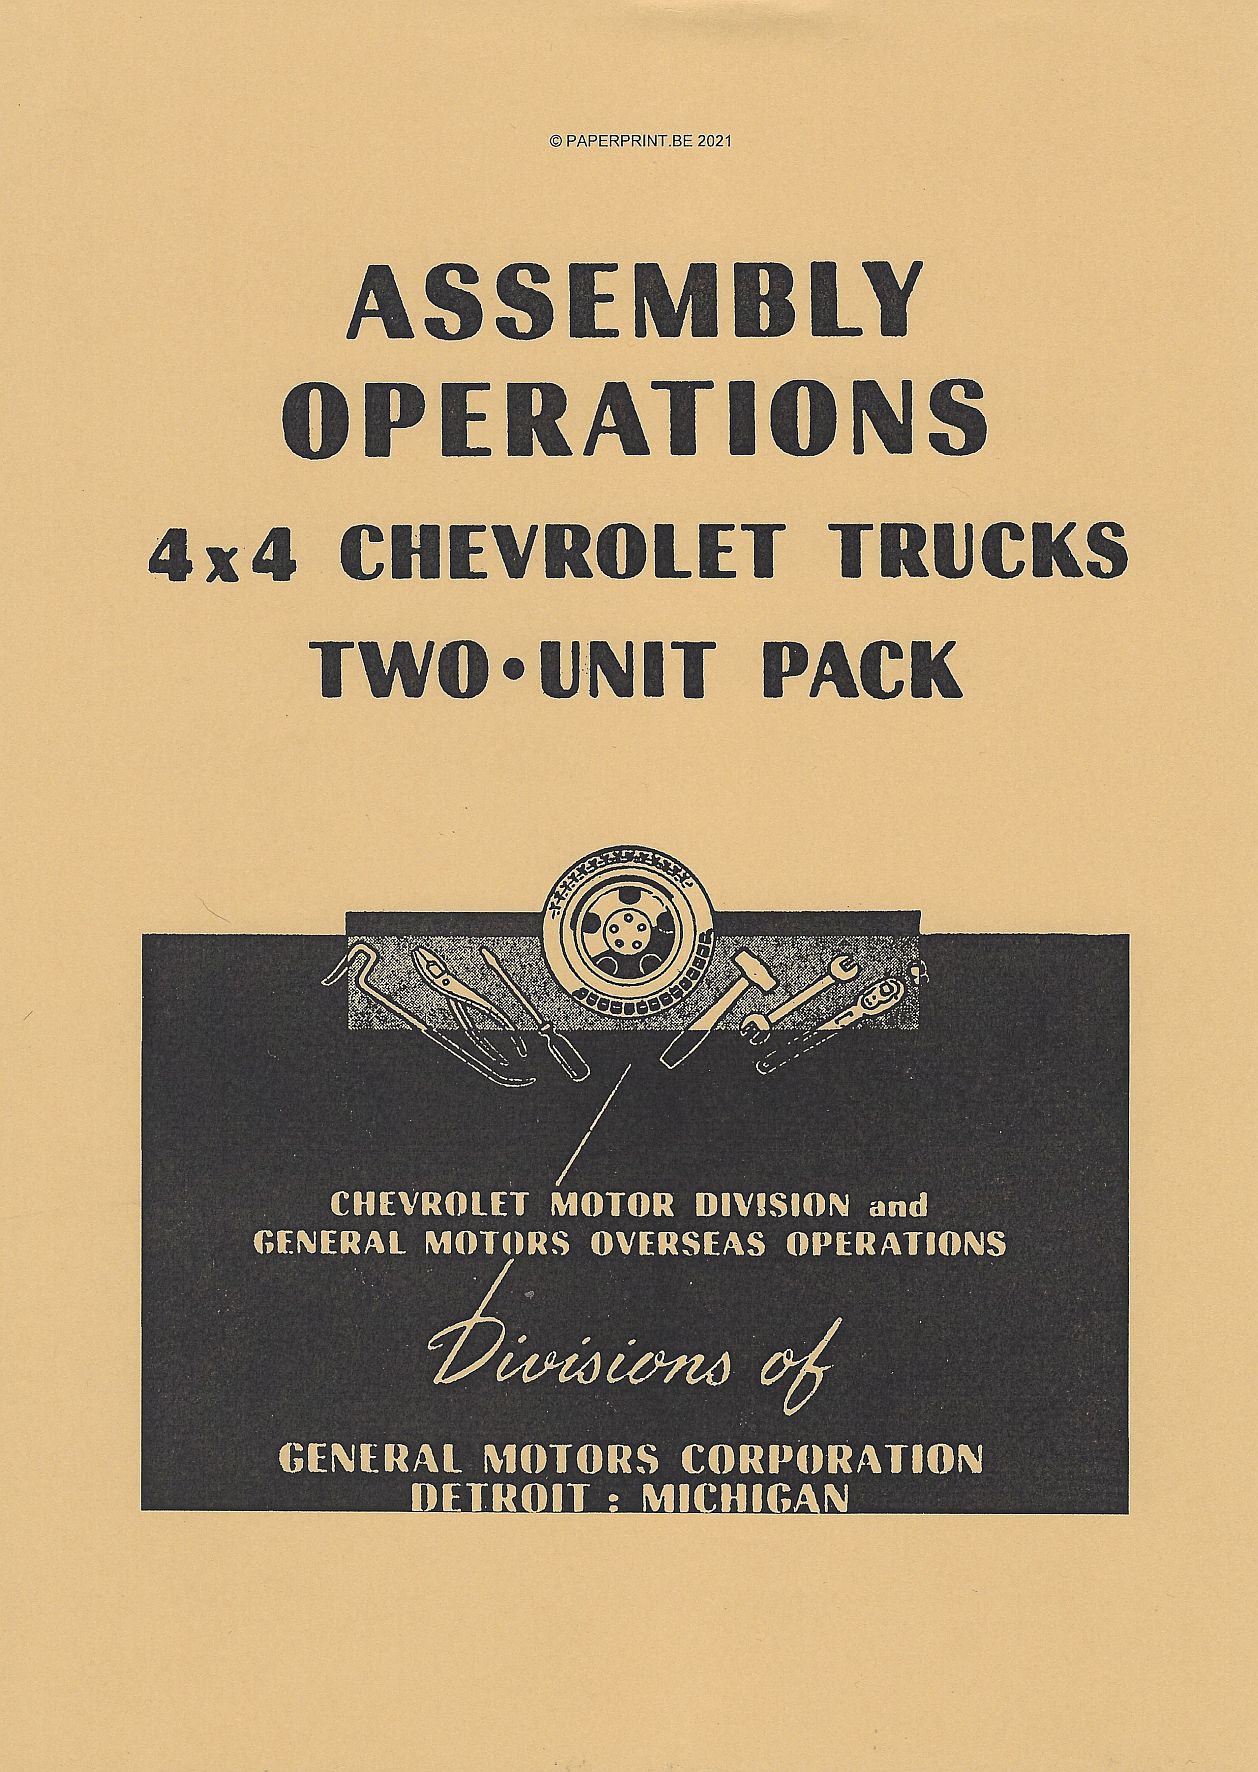 ASSEMBLY OPERATIONS 4x4 CHEVROLET TRUCKS TWO UNIT PACK US